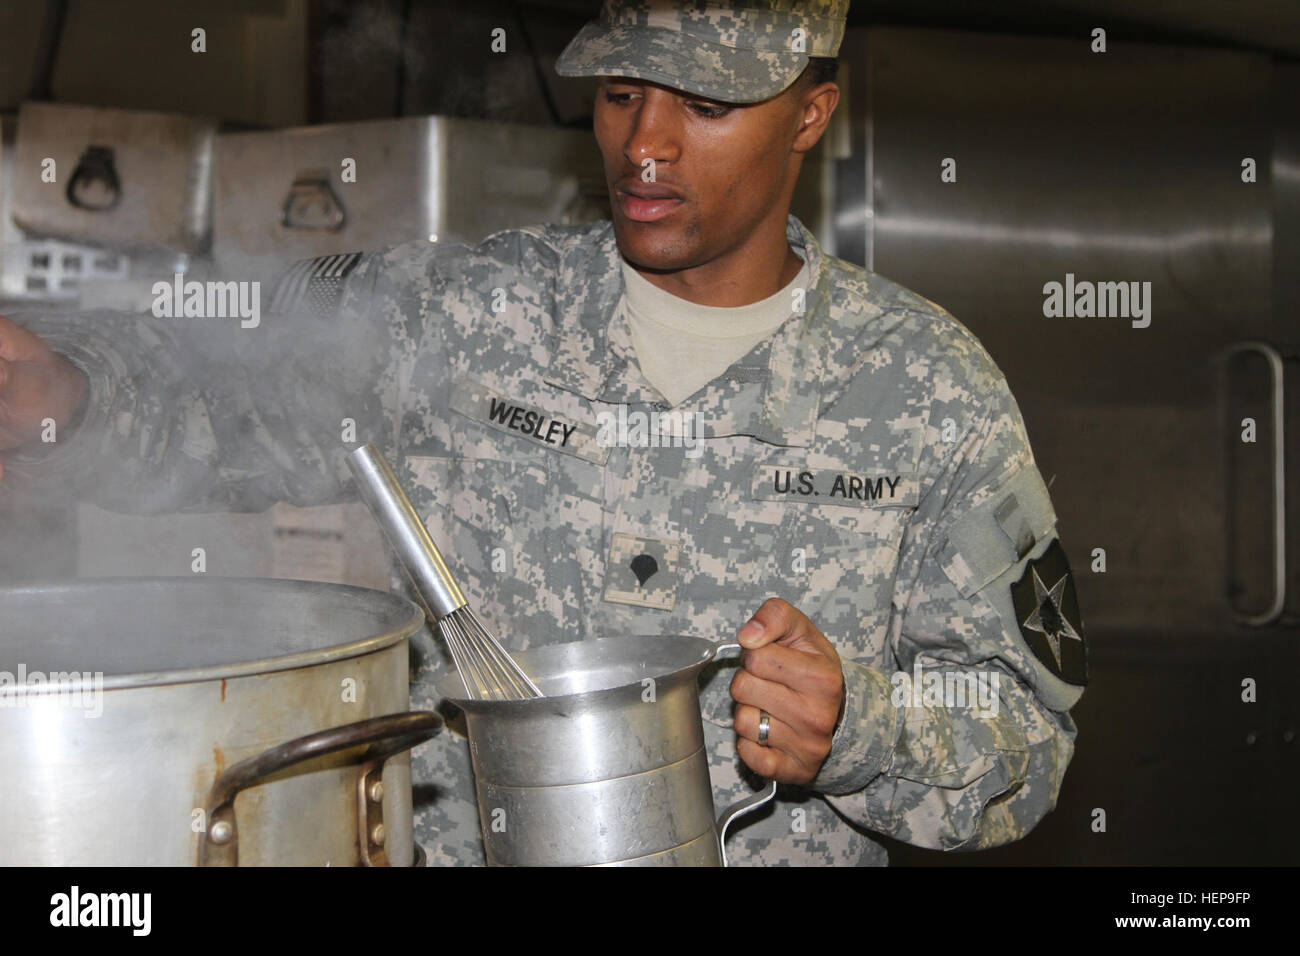 Spc. Brandon Wesley, a food service specialist with the Co. E, 3rd General Support Aviation Battalion, 2nd Combat Aviation Brigade pours water into a container April 1 just outside of Camp Humphreys in South Korea. The water was used to make chicken gravy which was part of a full lunch menu served to the judges of the Philip A. Connelly Award for Excellence in Army Food Services. Rising to the top 040115-A-TU438-003 Stock Photo